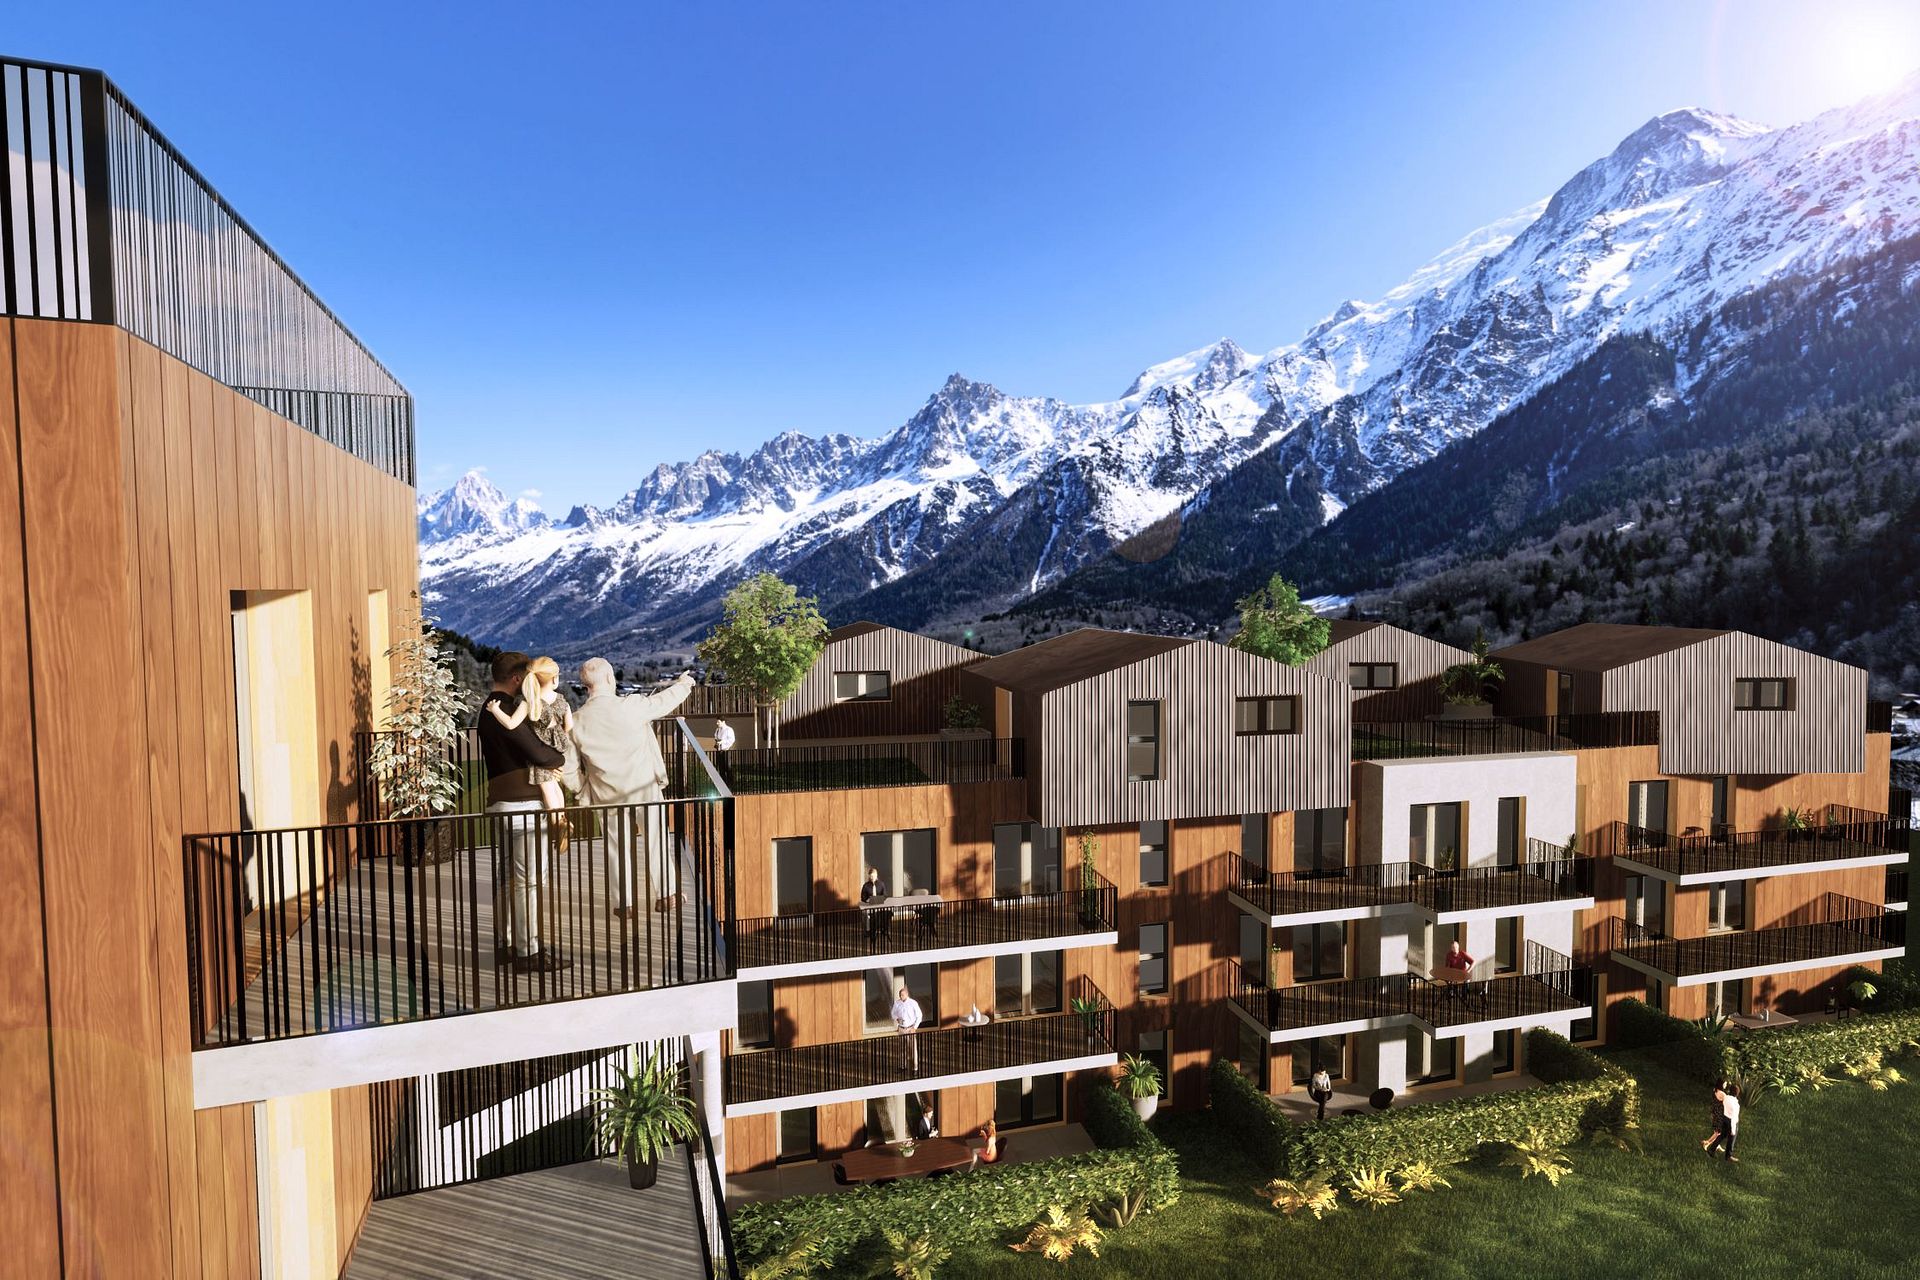 3 bed Apartment For Sale in Chamonix Mont Blanc, French Alps